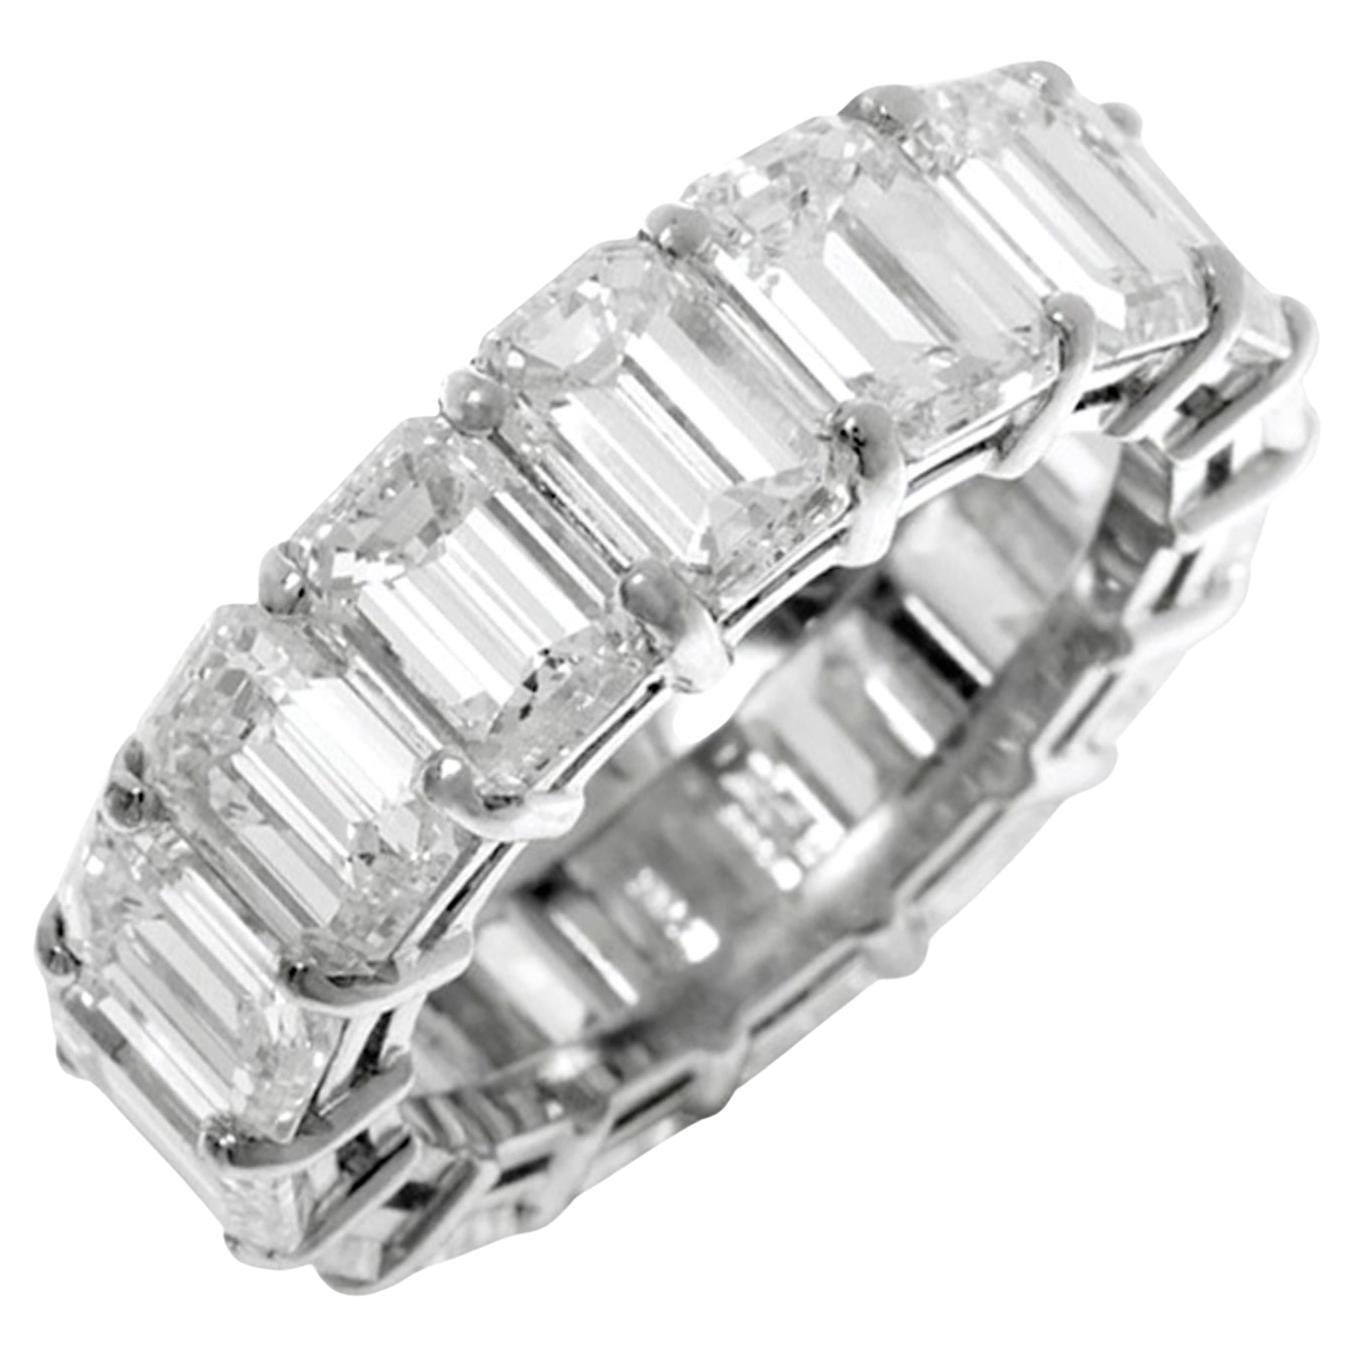 Diana M. PLATINUM ETERNITY DIAMOND WEDDING BAND GIA CERTIFIED WITH 14.10CT  For Sale